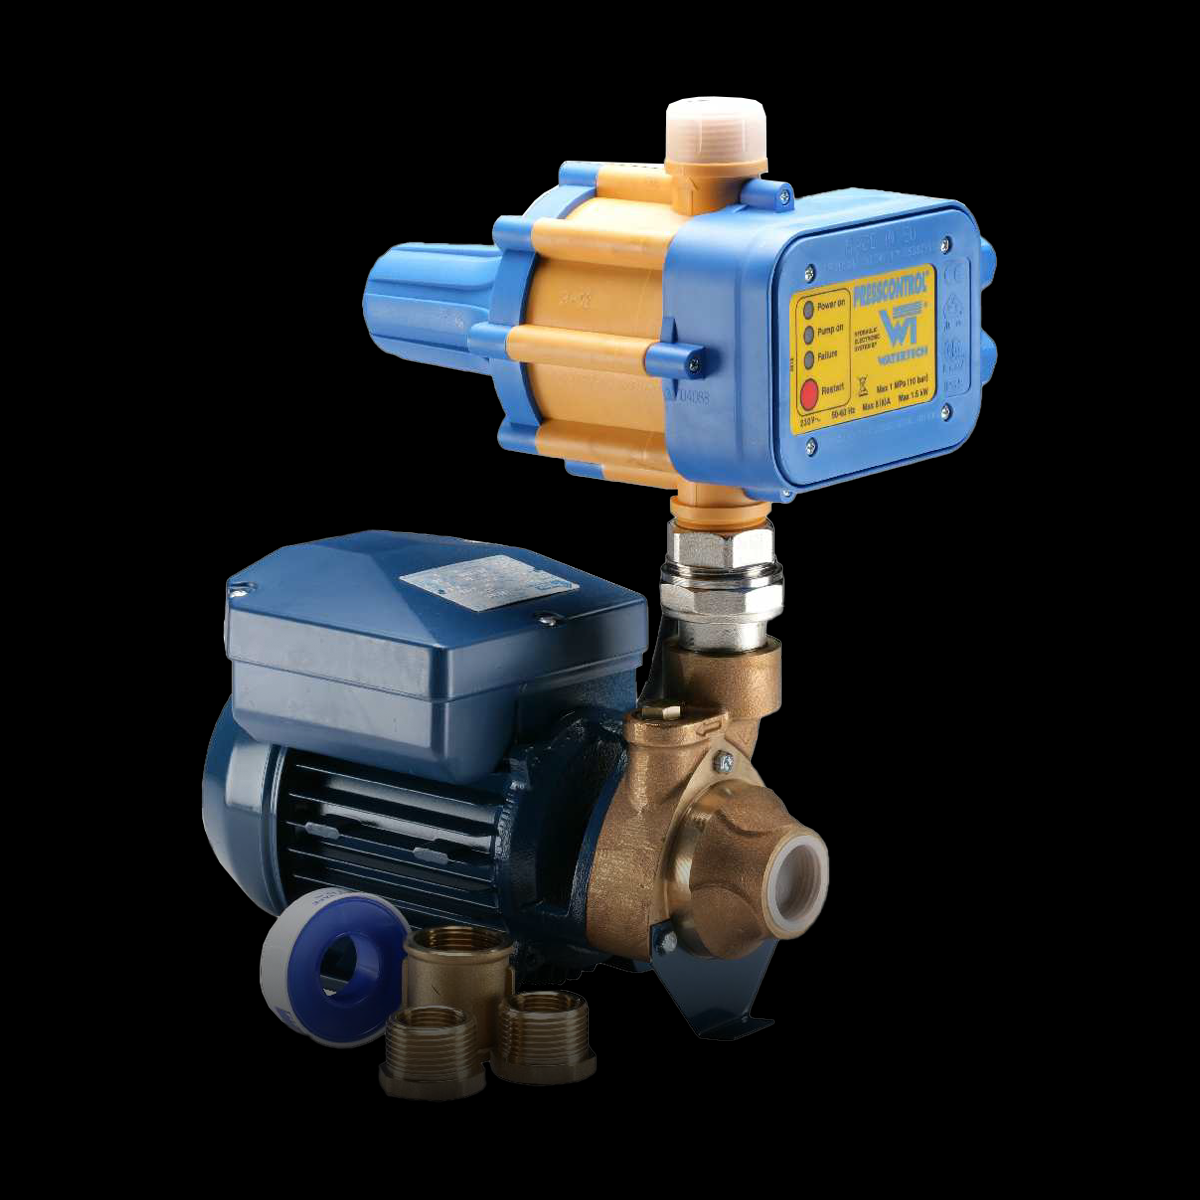 Water Boost Pumps Presscontrol booster pumps 60°C and 65°C models by Monarch Water.